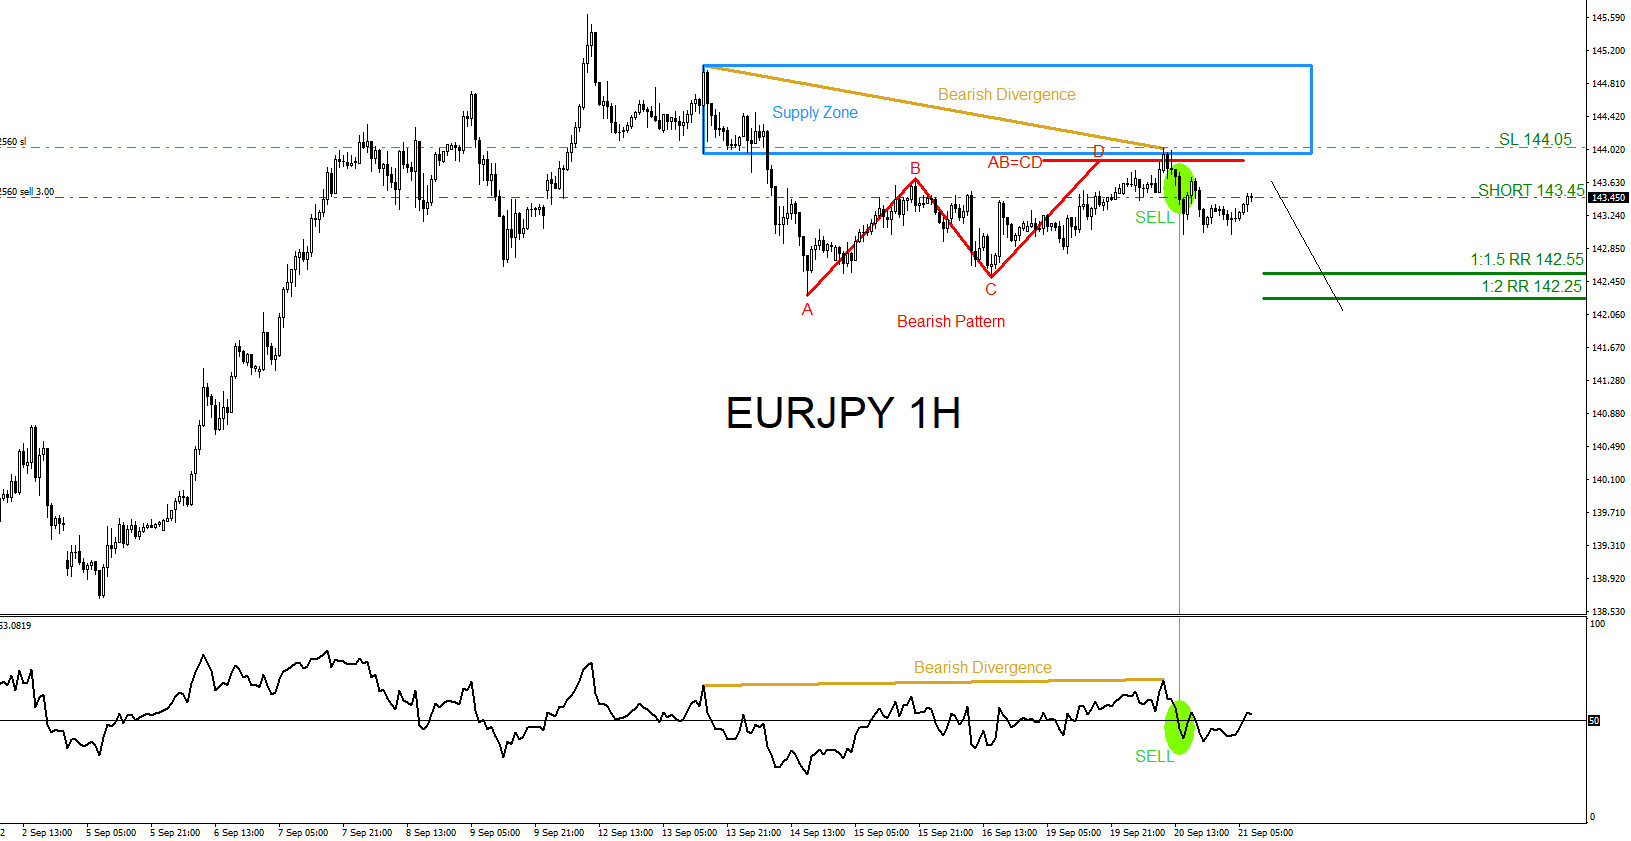 EURJPY : Moves Lower as Expected